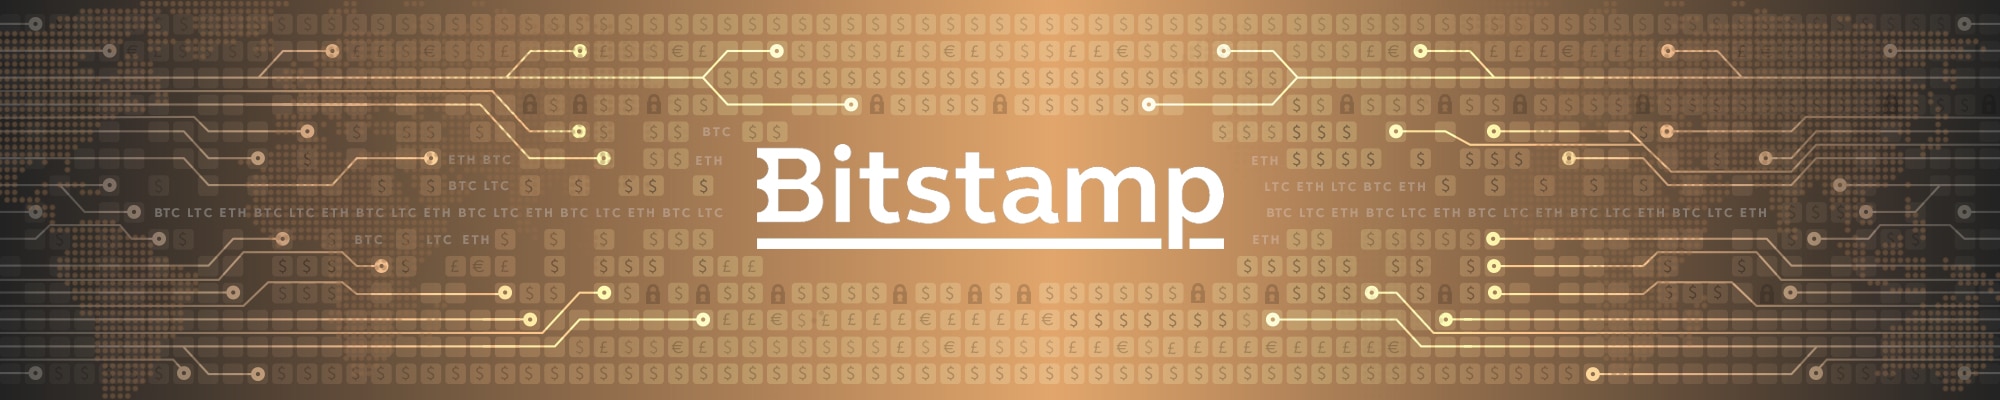 how much is bitstamp worth per share